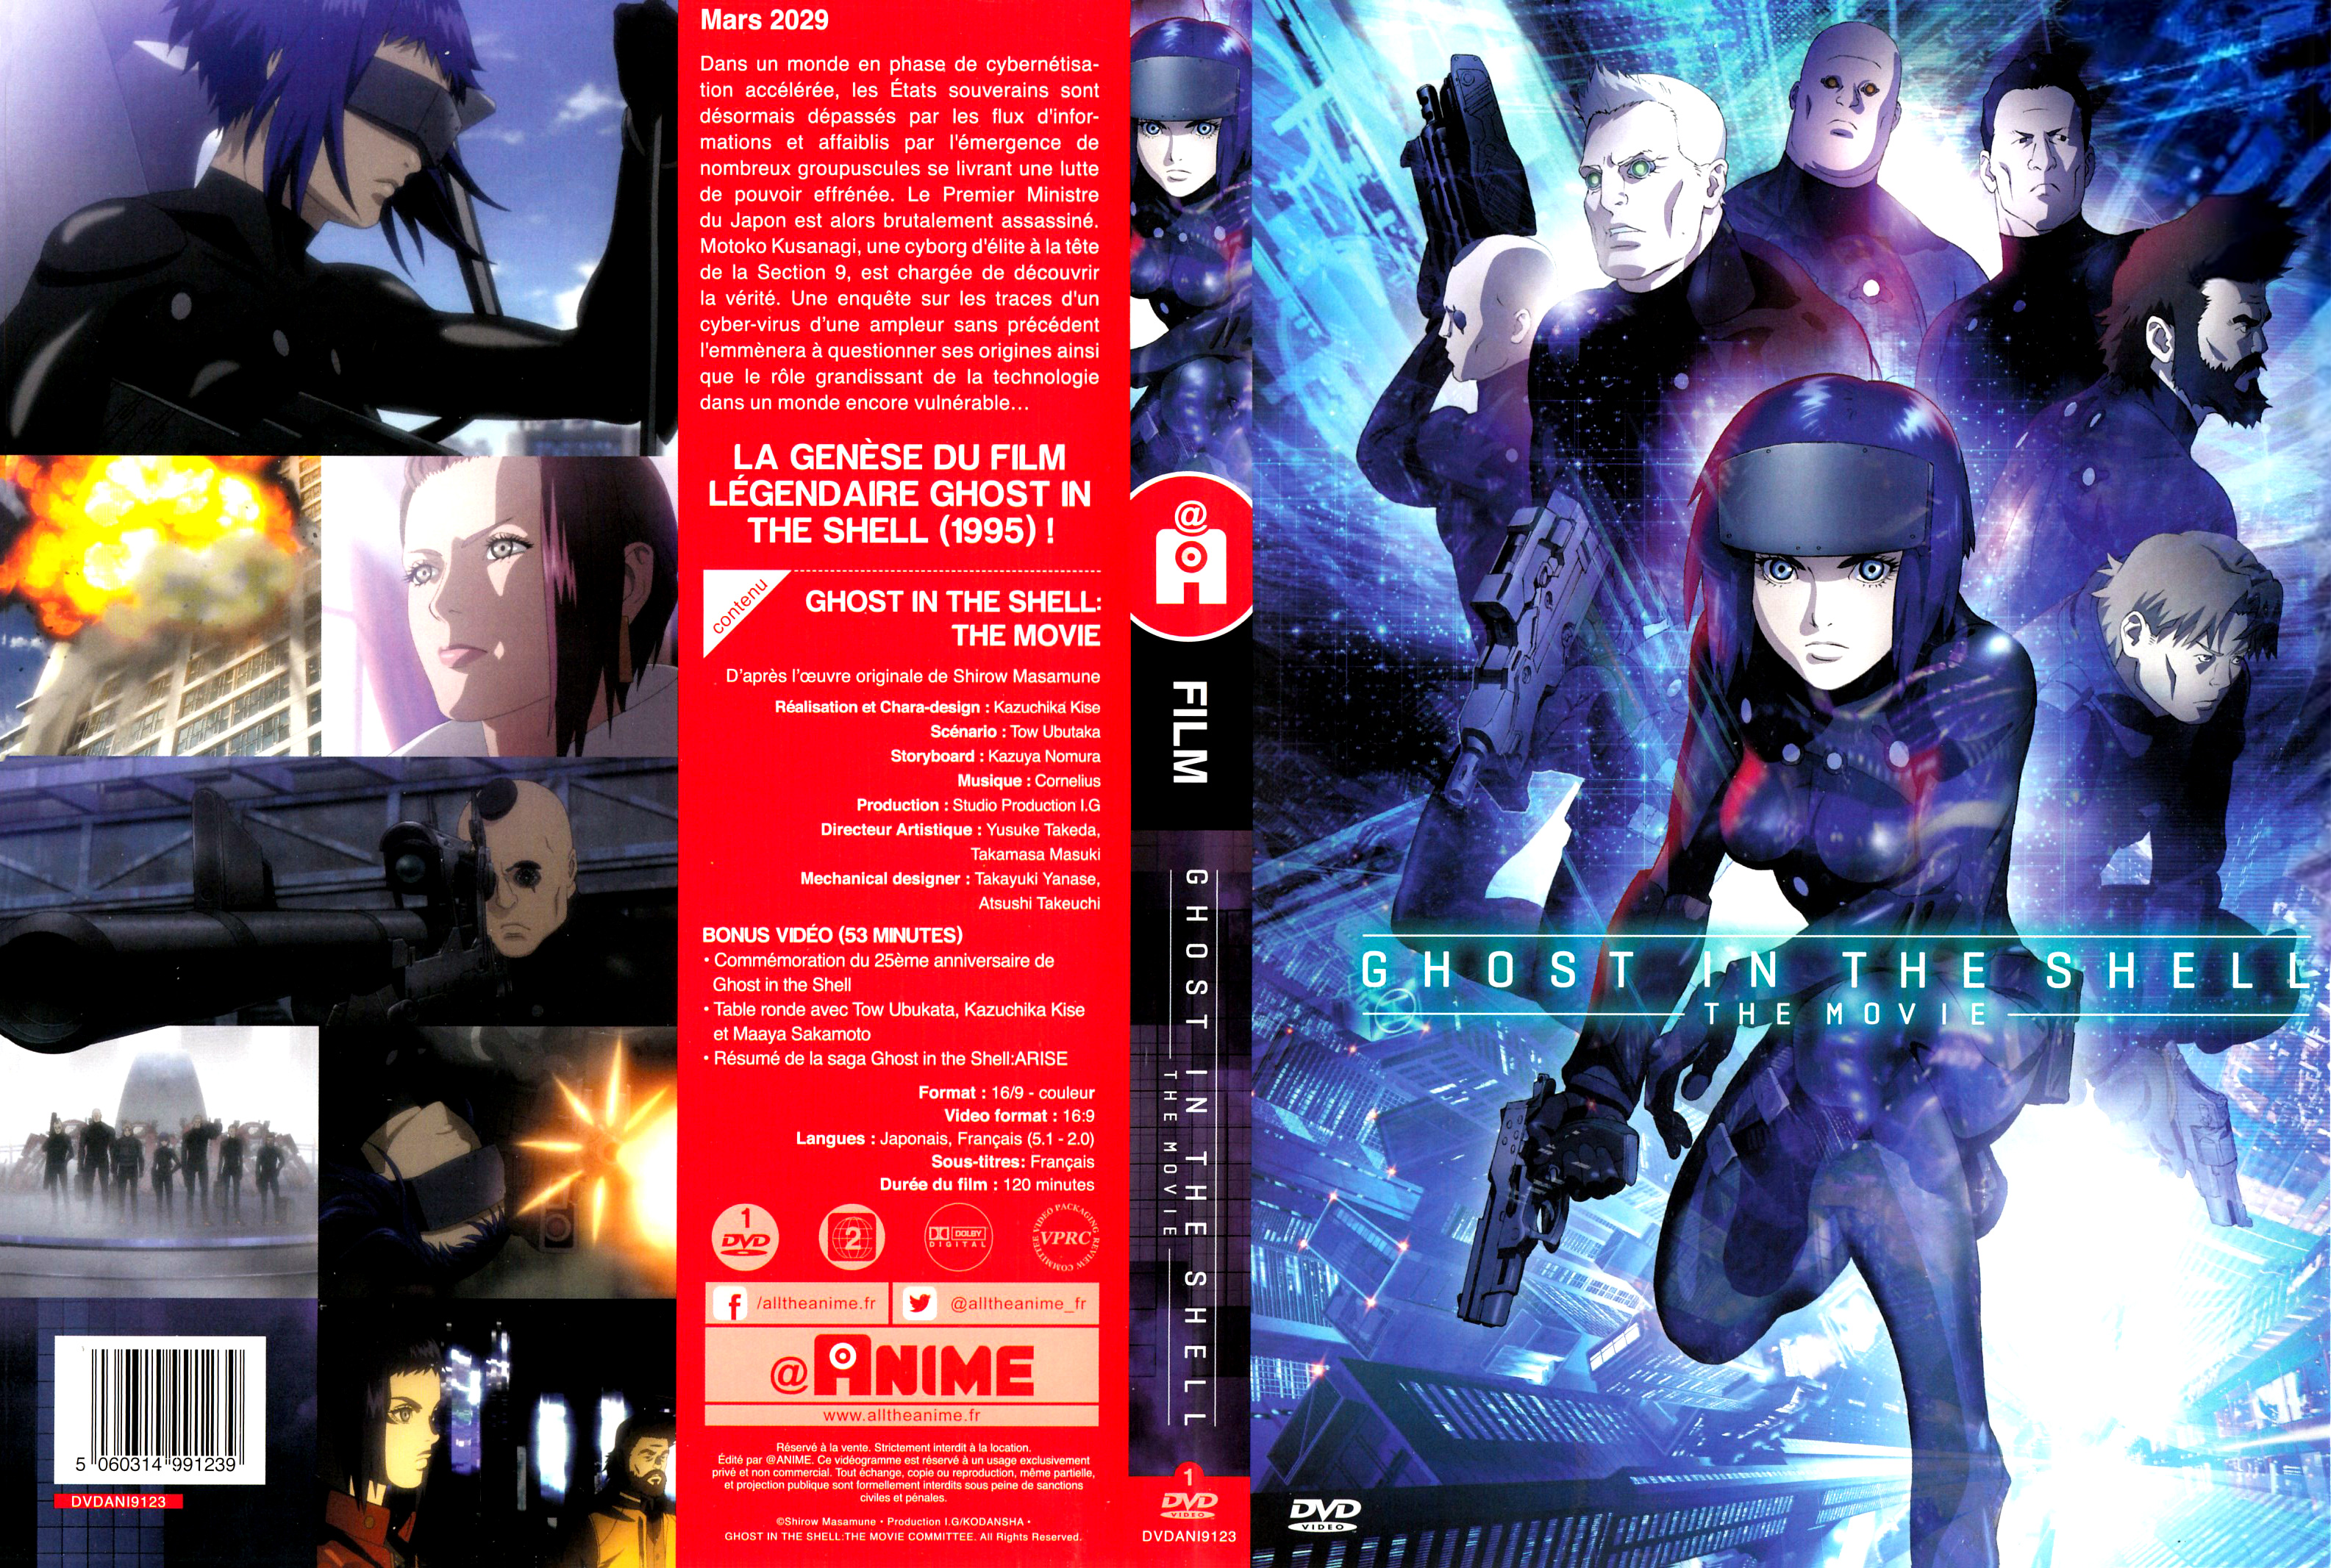 Jaquette DVD Ghost in the Shell The movie